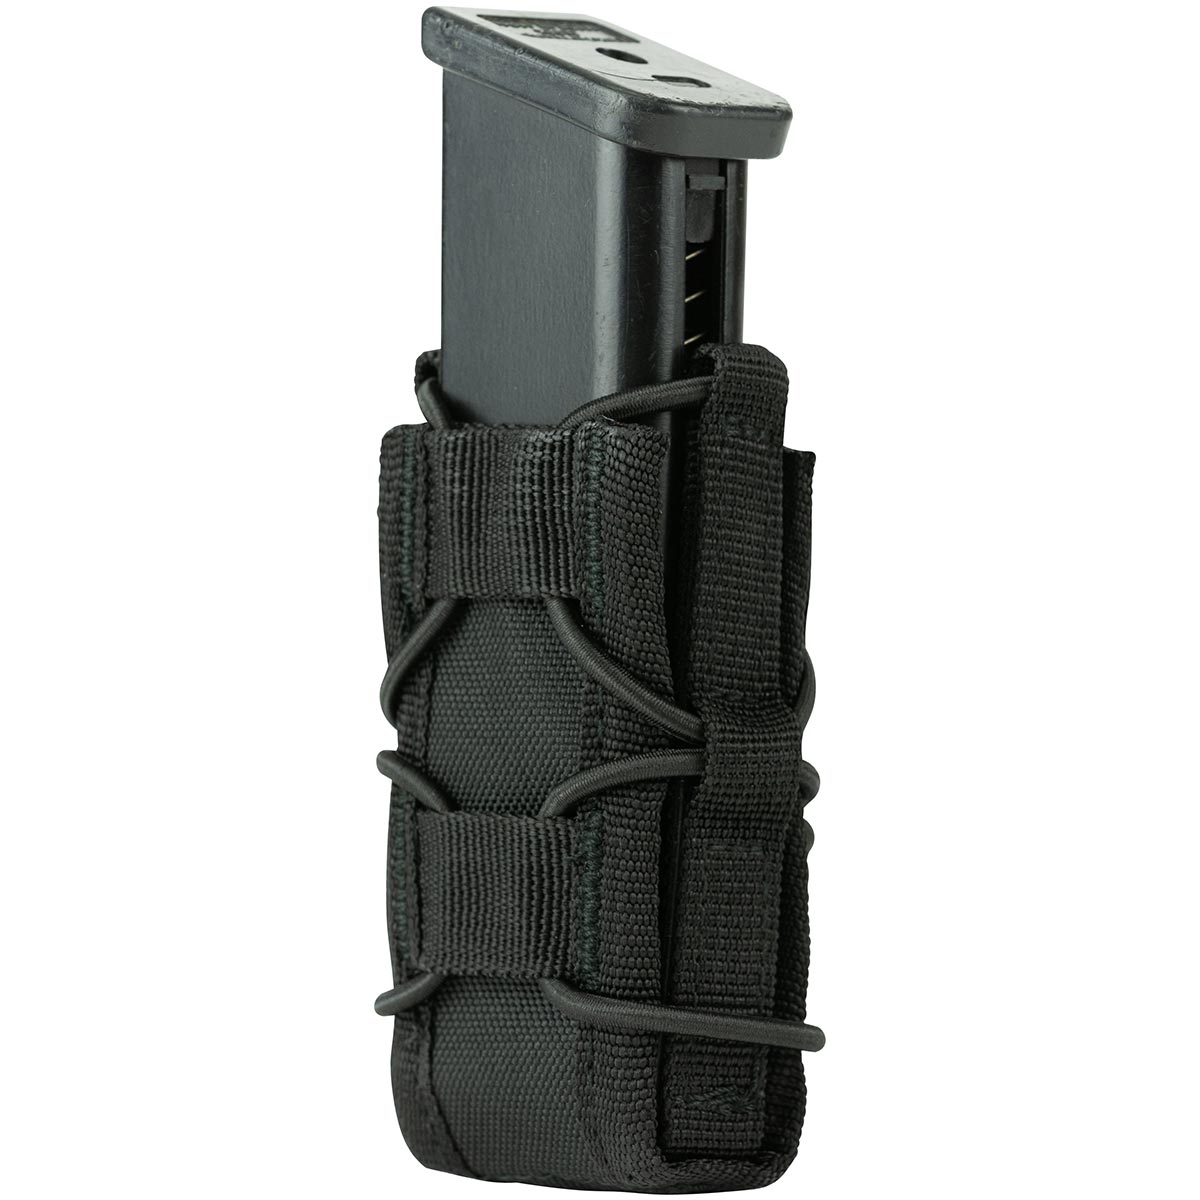 Viper Elite Tactical Pistol Mag Pouch MOLLE Adjustable Airsoft Army ...